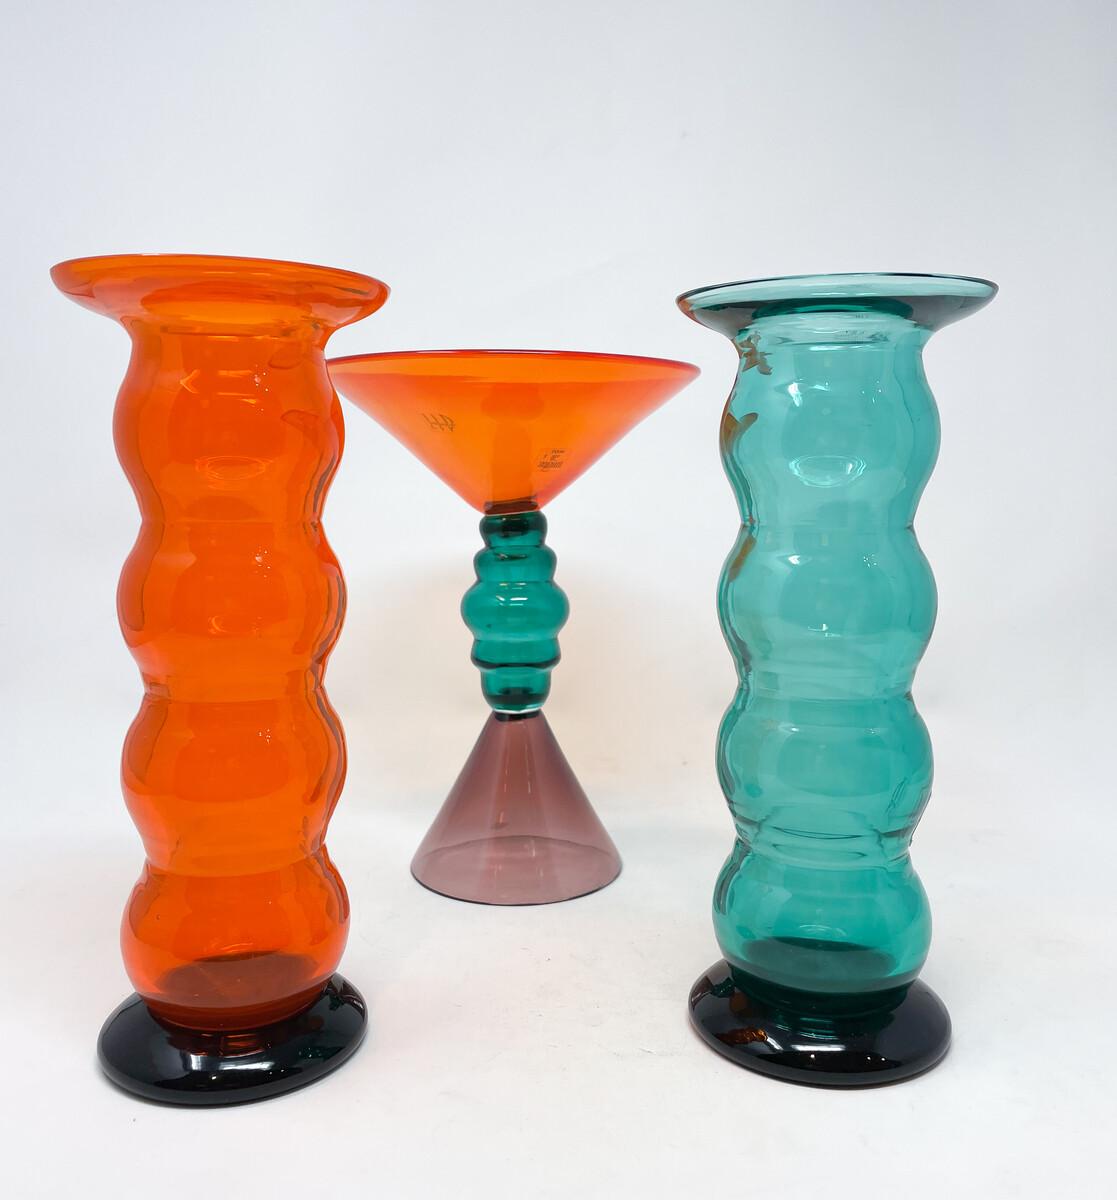 Italian Serie of 3 Vases by Marcello Furlan, Italy, Signed and Dated For Sale